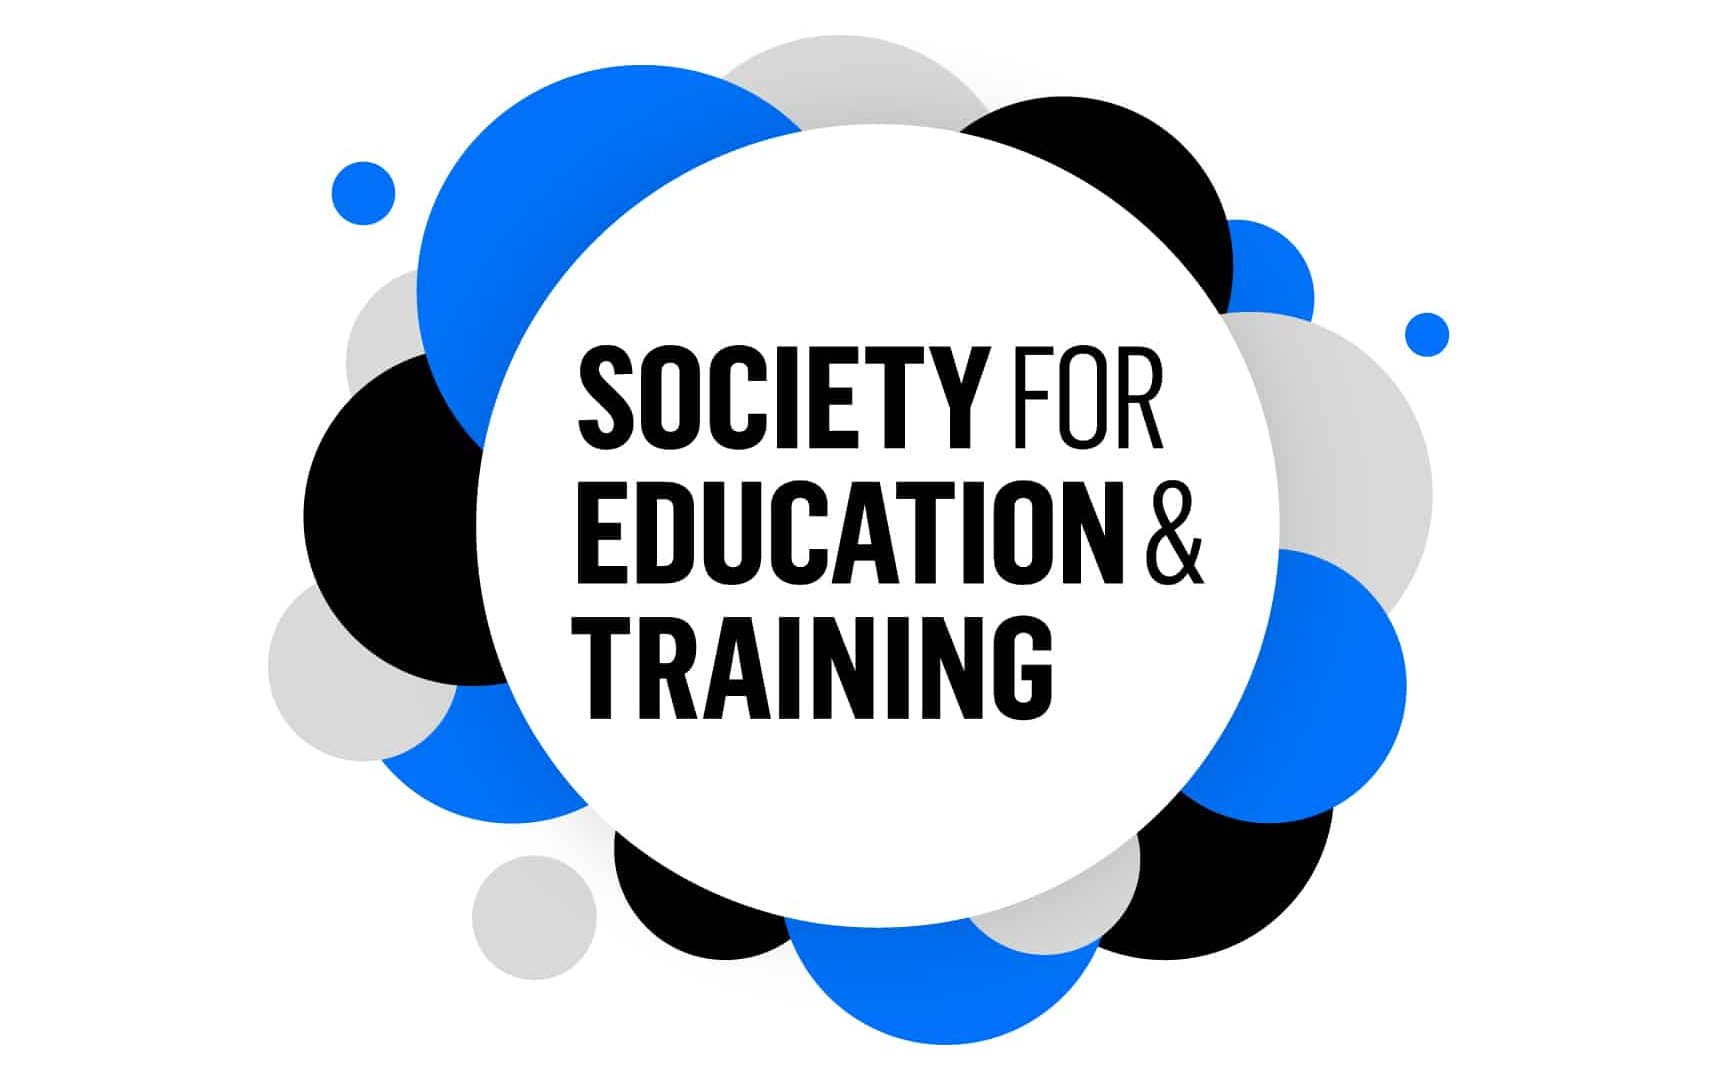 Society for Education and Training logo